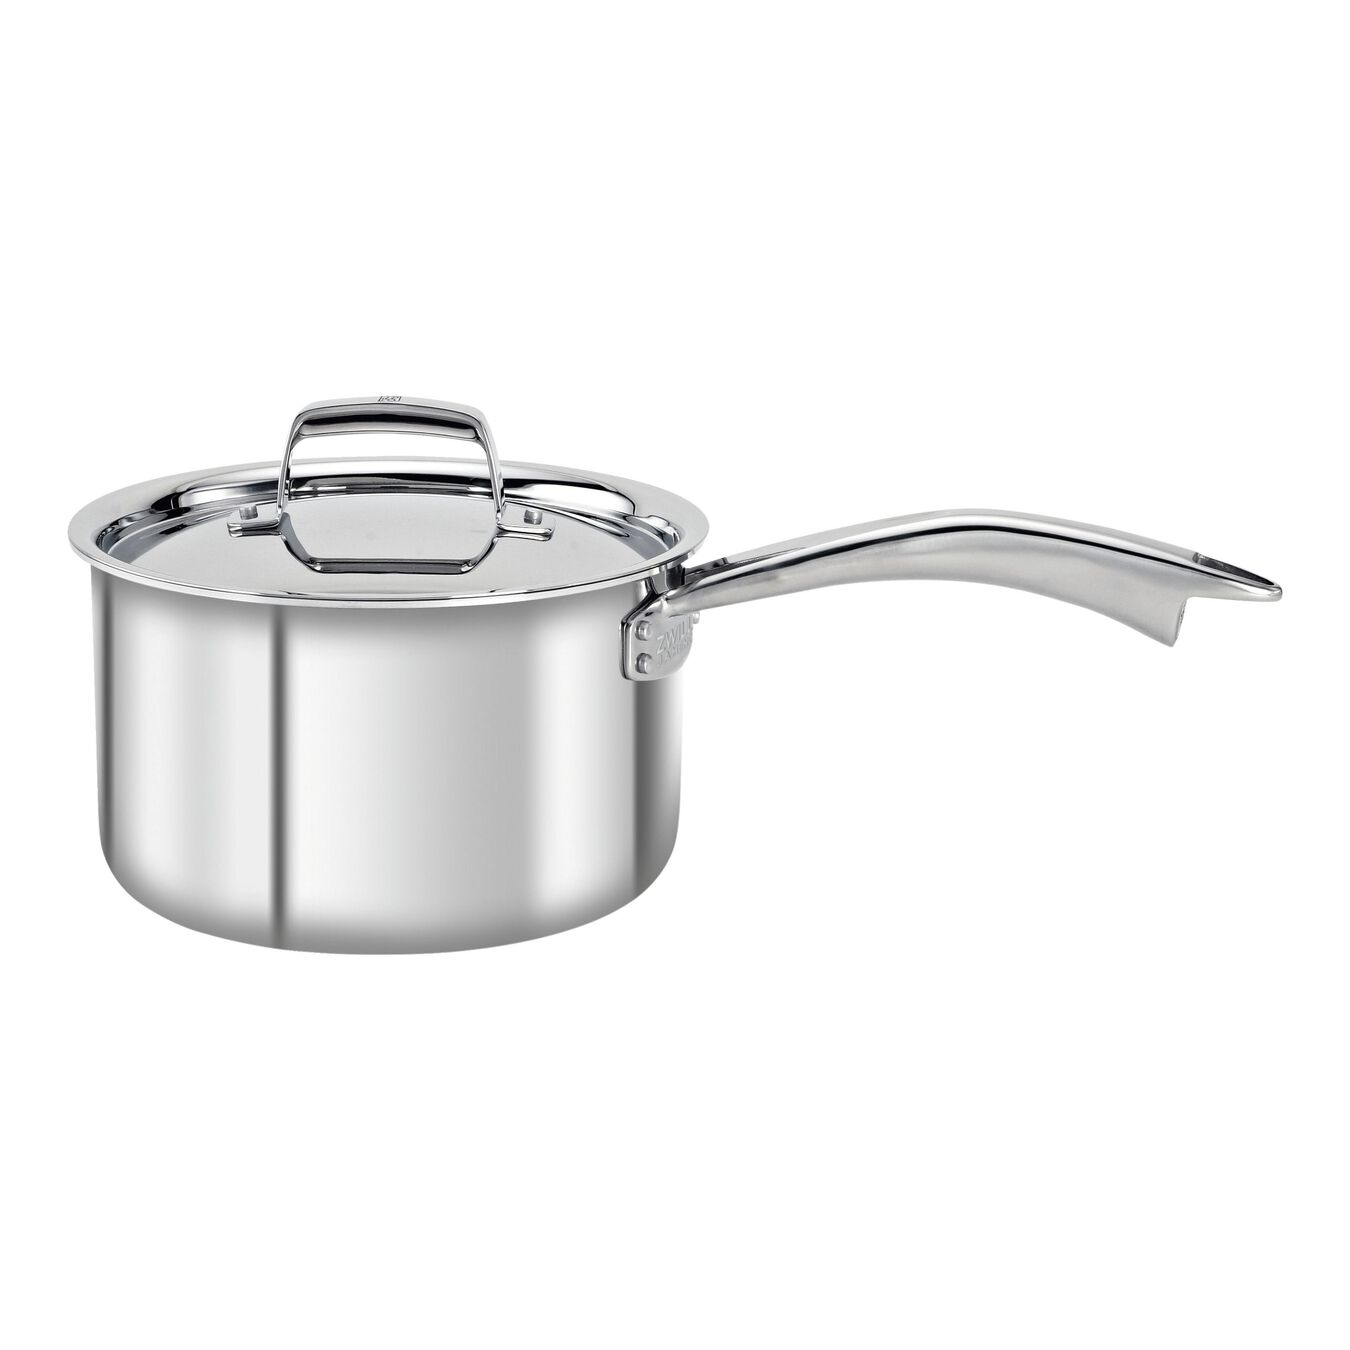 3.75 l 18/10 Stainless Steel Sauce Pan With Lid,,large 1